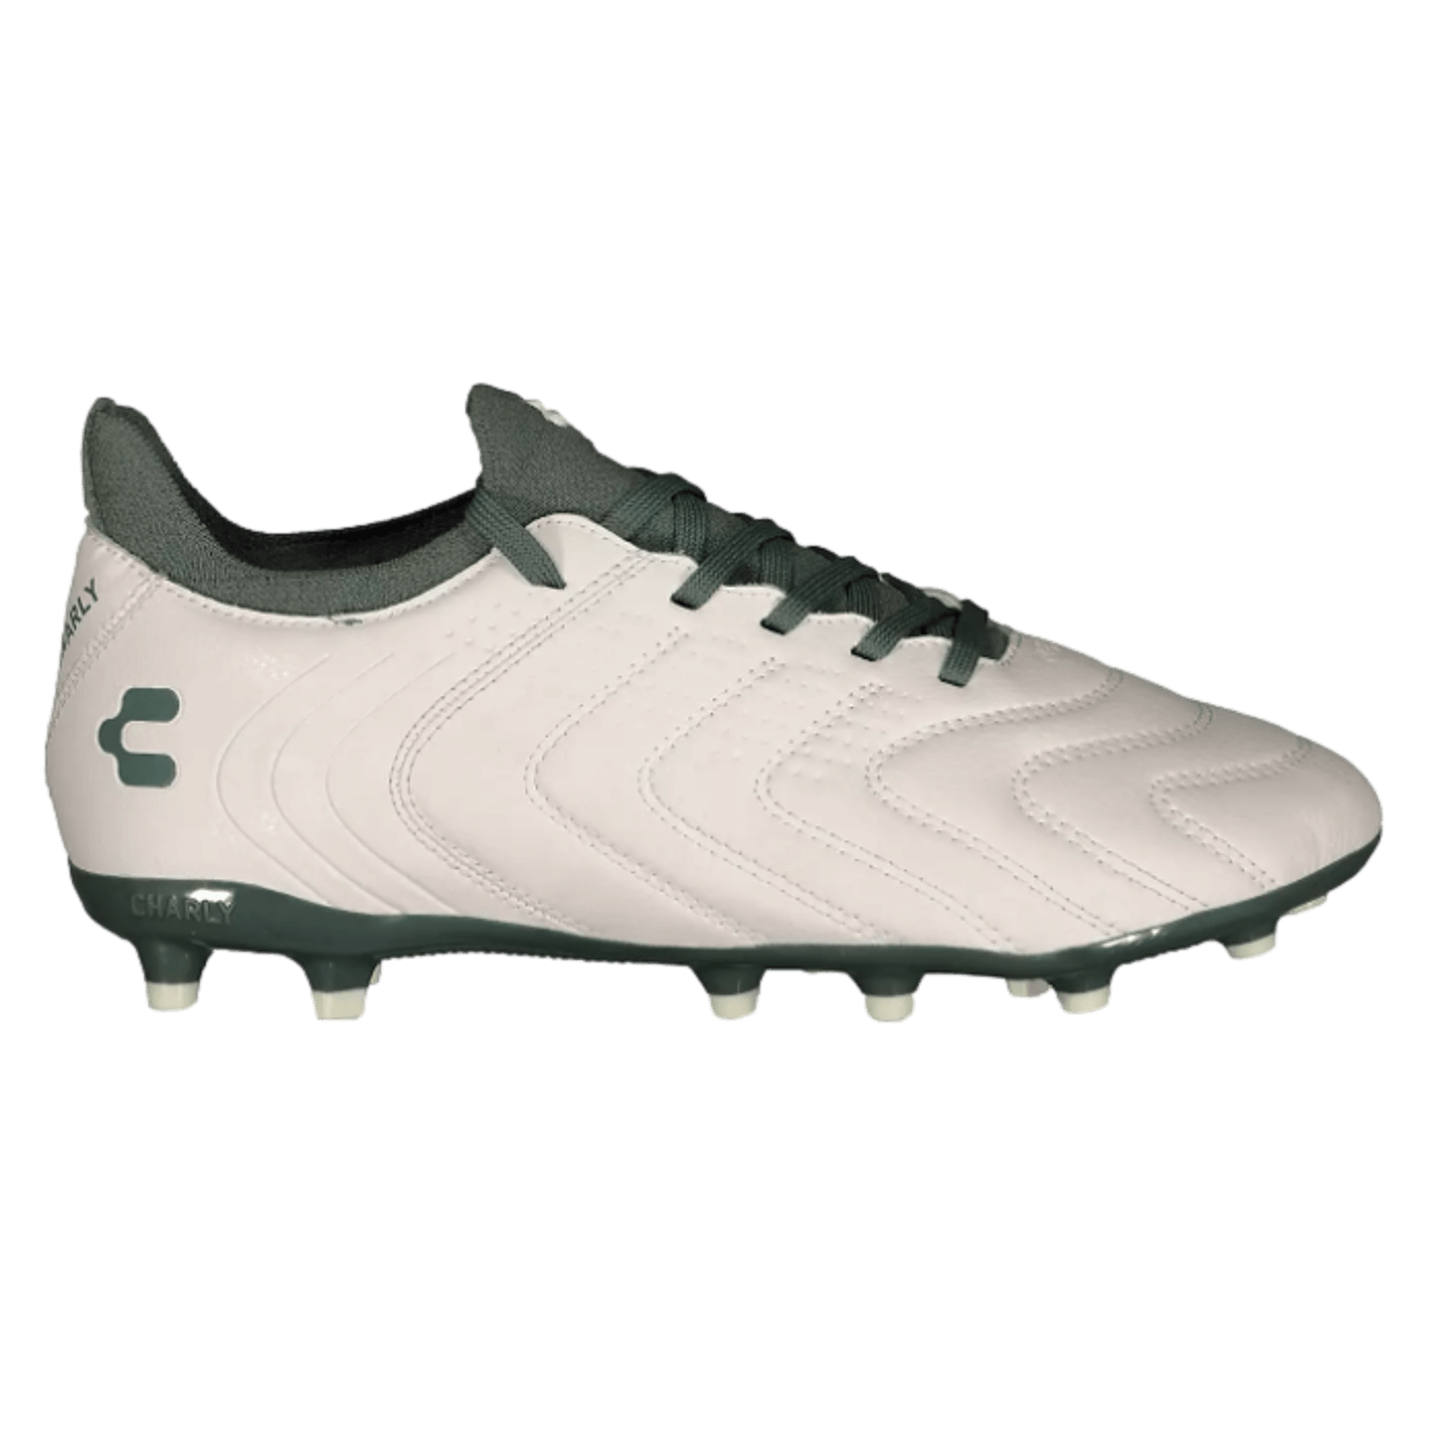 Charly Encore RL Firm Ground Cleats